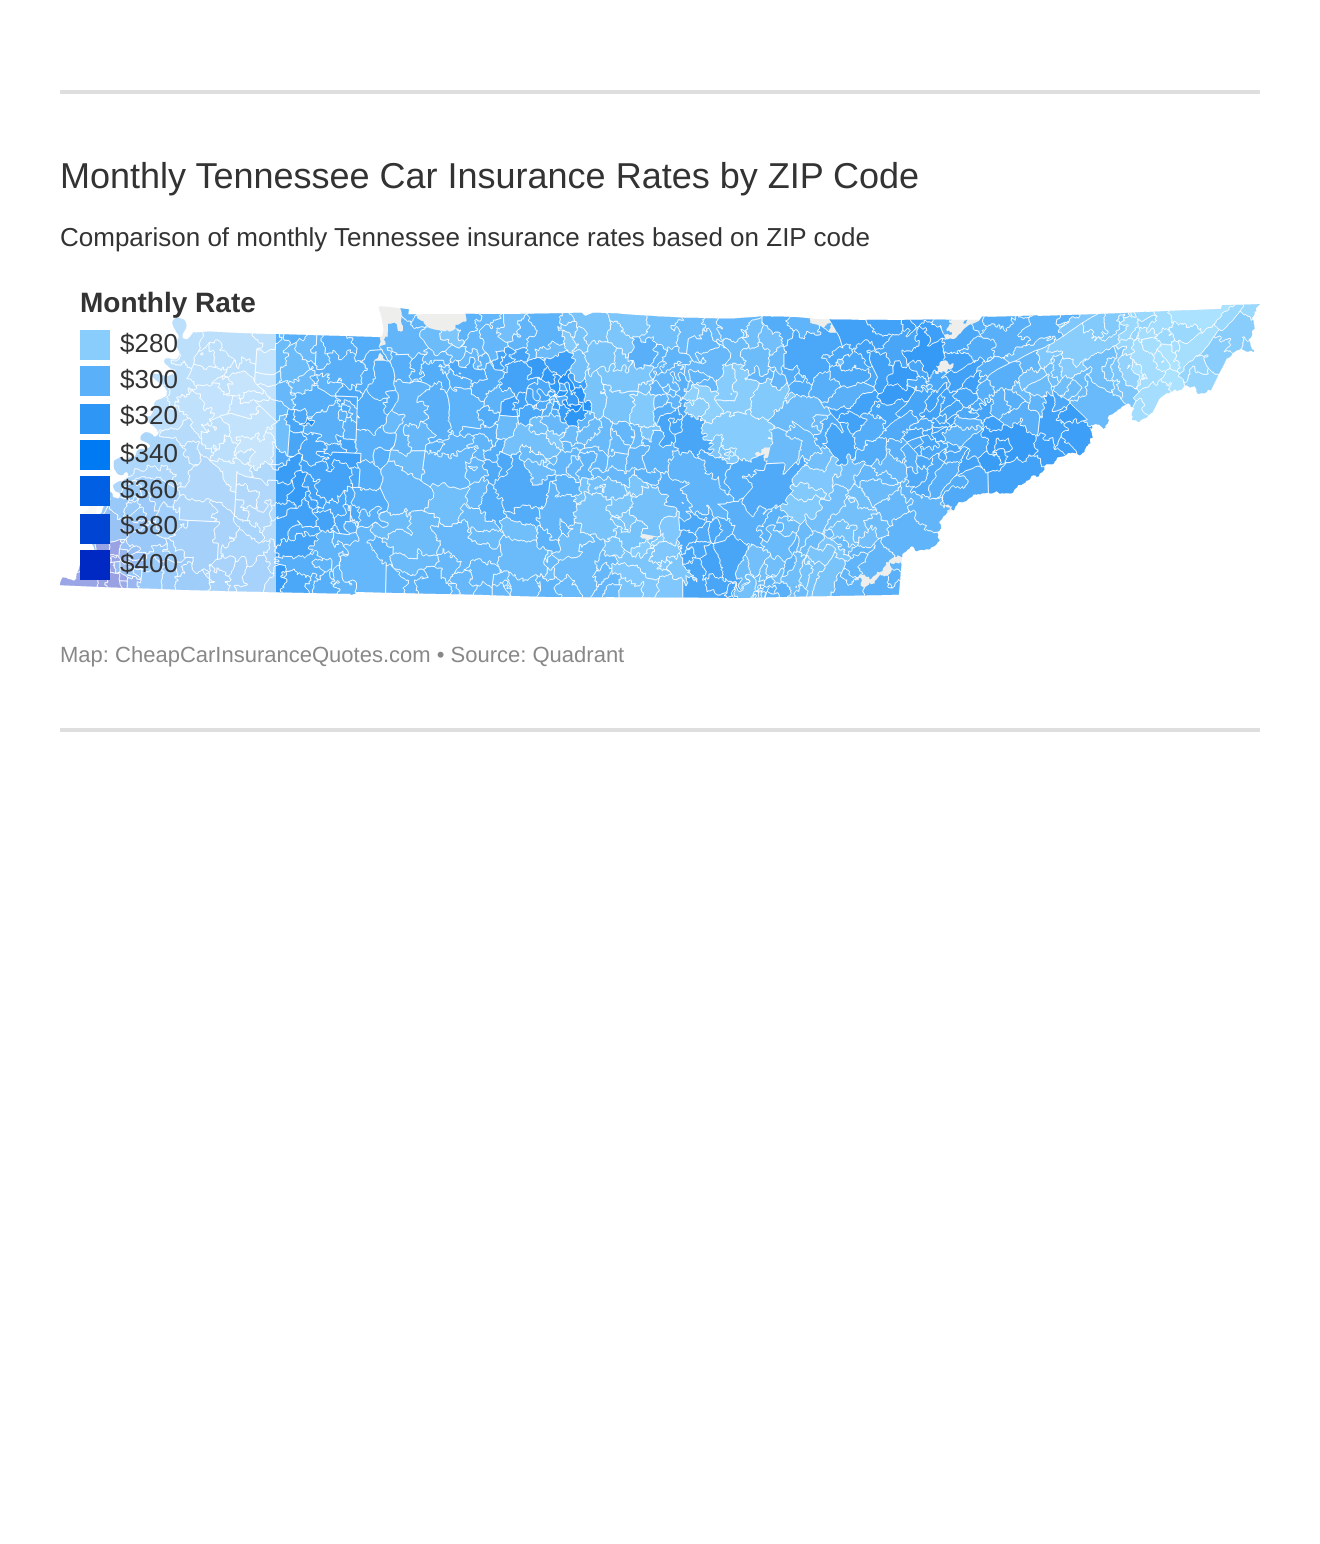 Monthly Tennessee Car Insurance Rates by ZIP Code